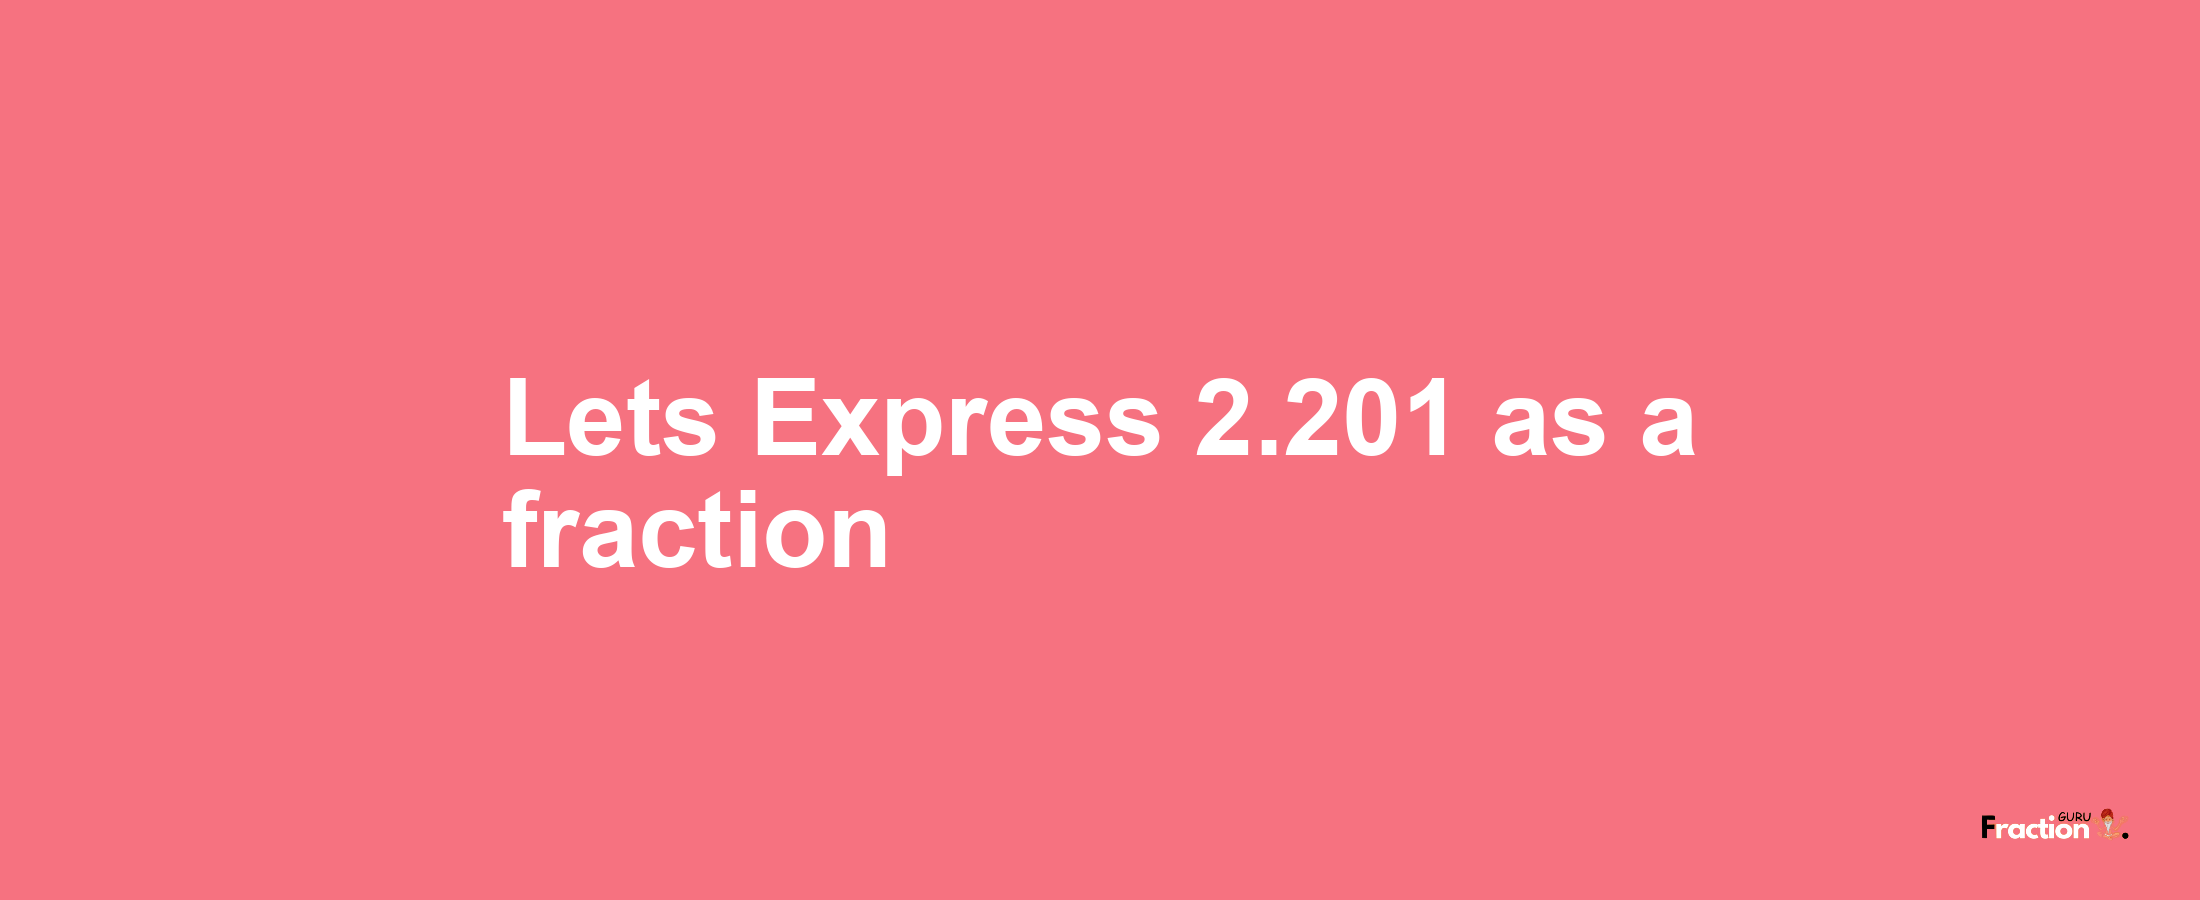 Lets Express 2.201 as afraction